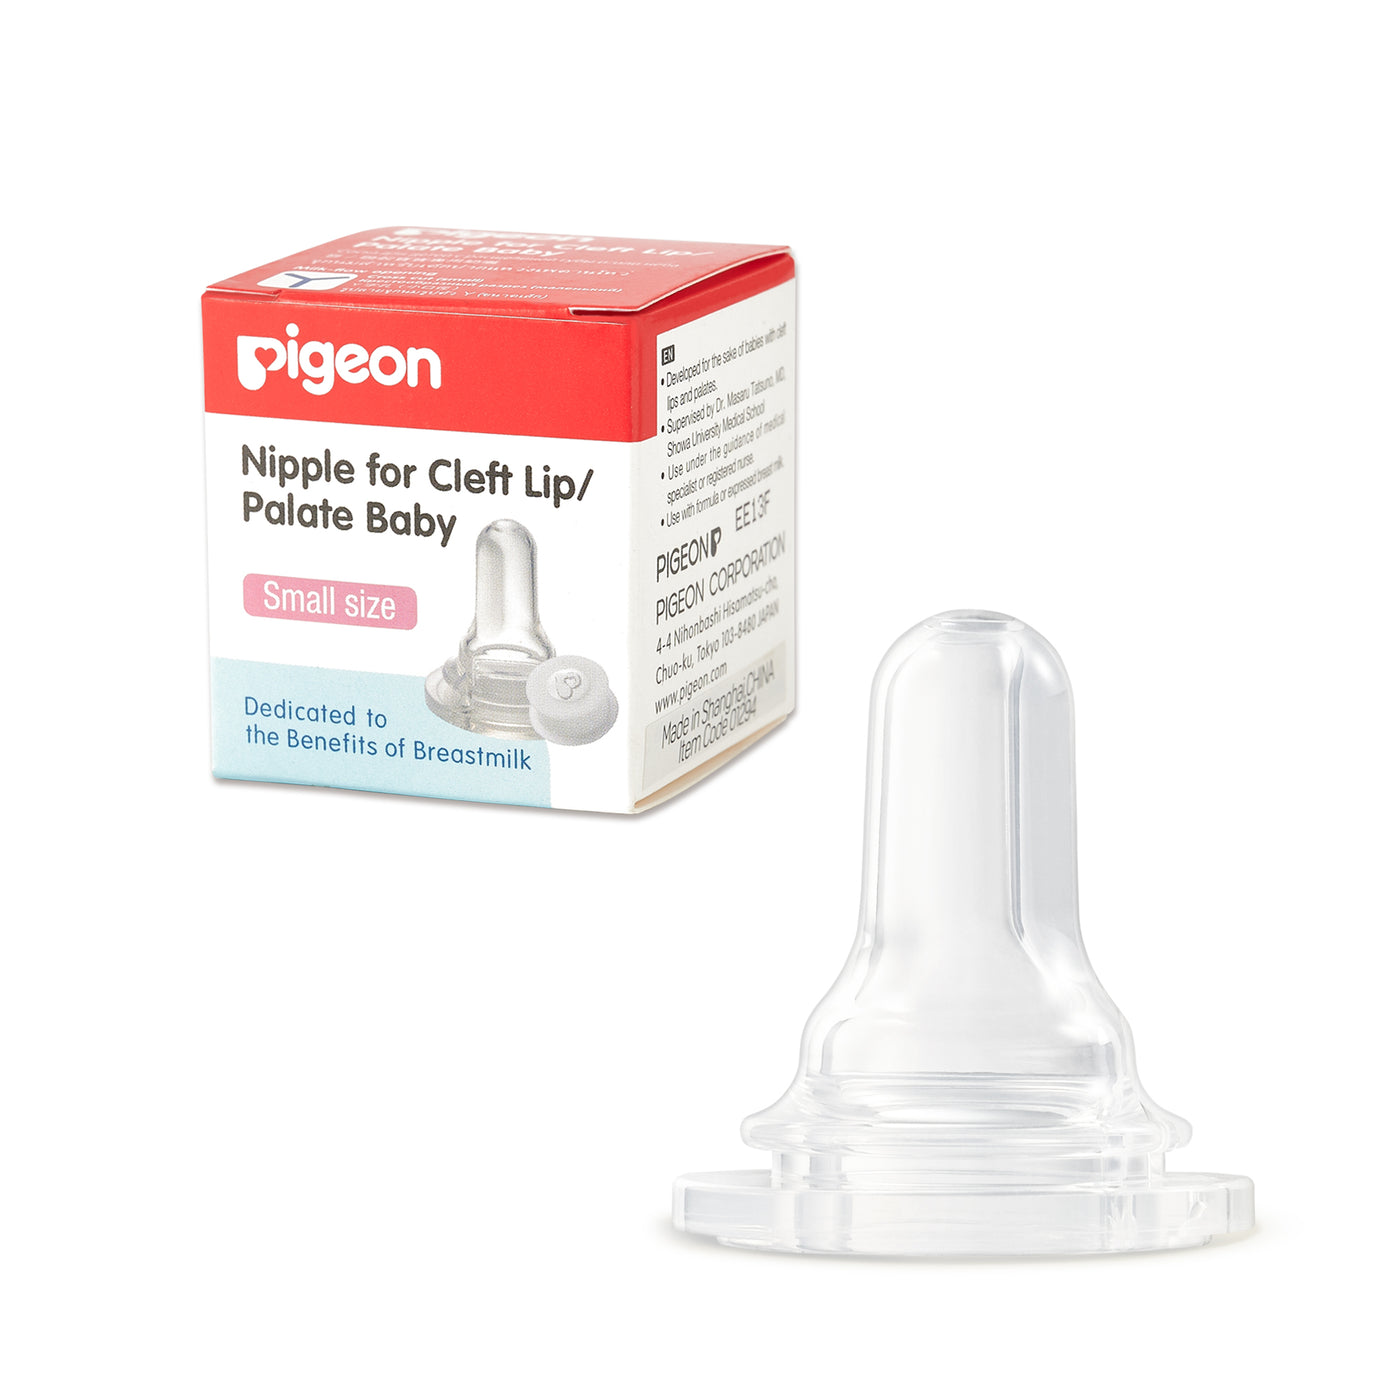 Bottle Nipple for Cleft Lip/Palate Baby, Regular Size-2